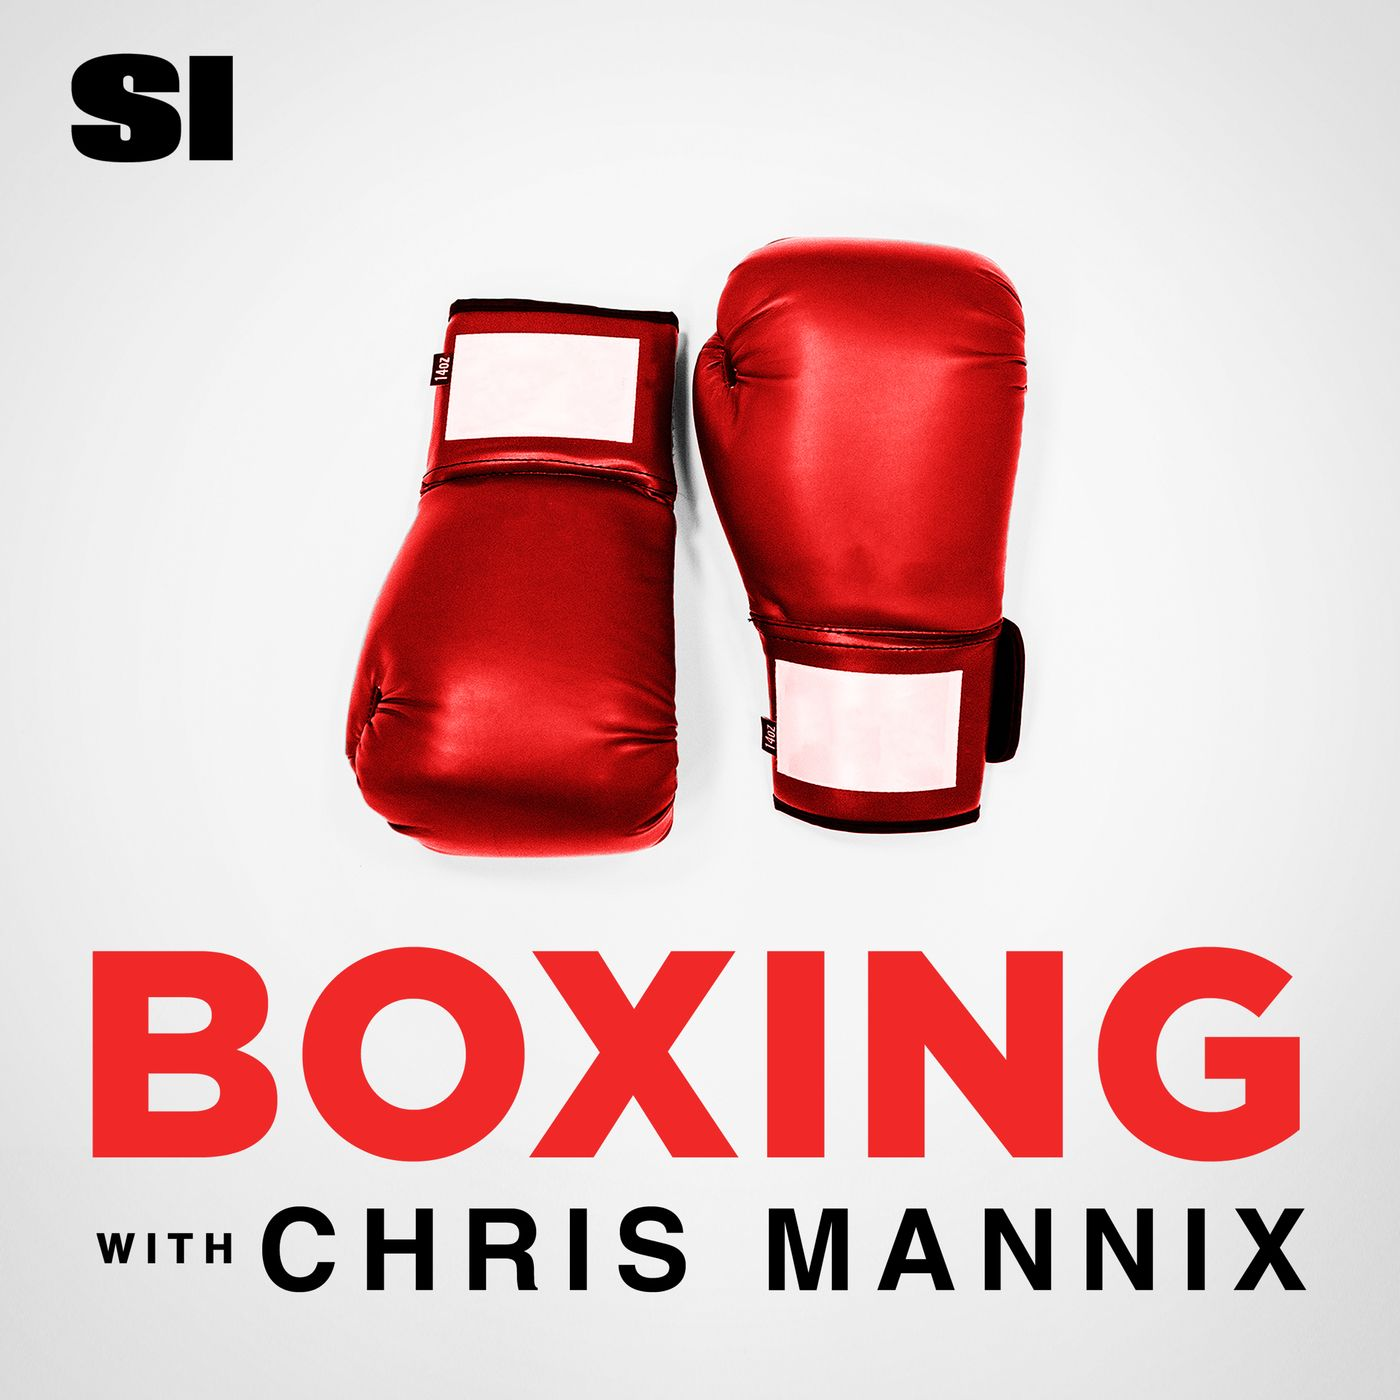 A highlight from Boxing with Chris Mannix - Trouble for Benn, Kambosos-Haney, and Wilder, HOF?